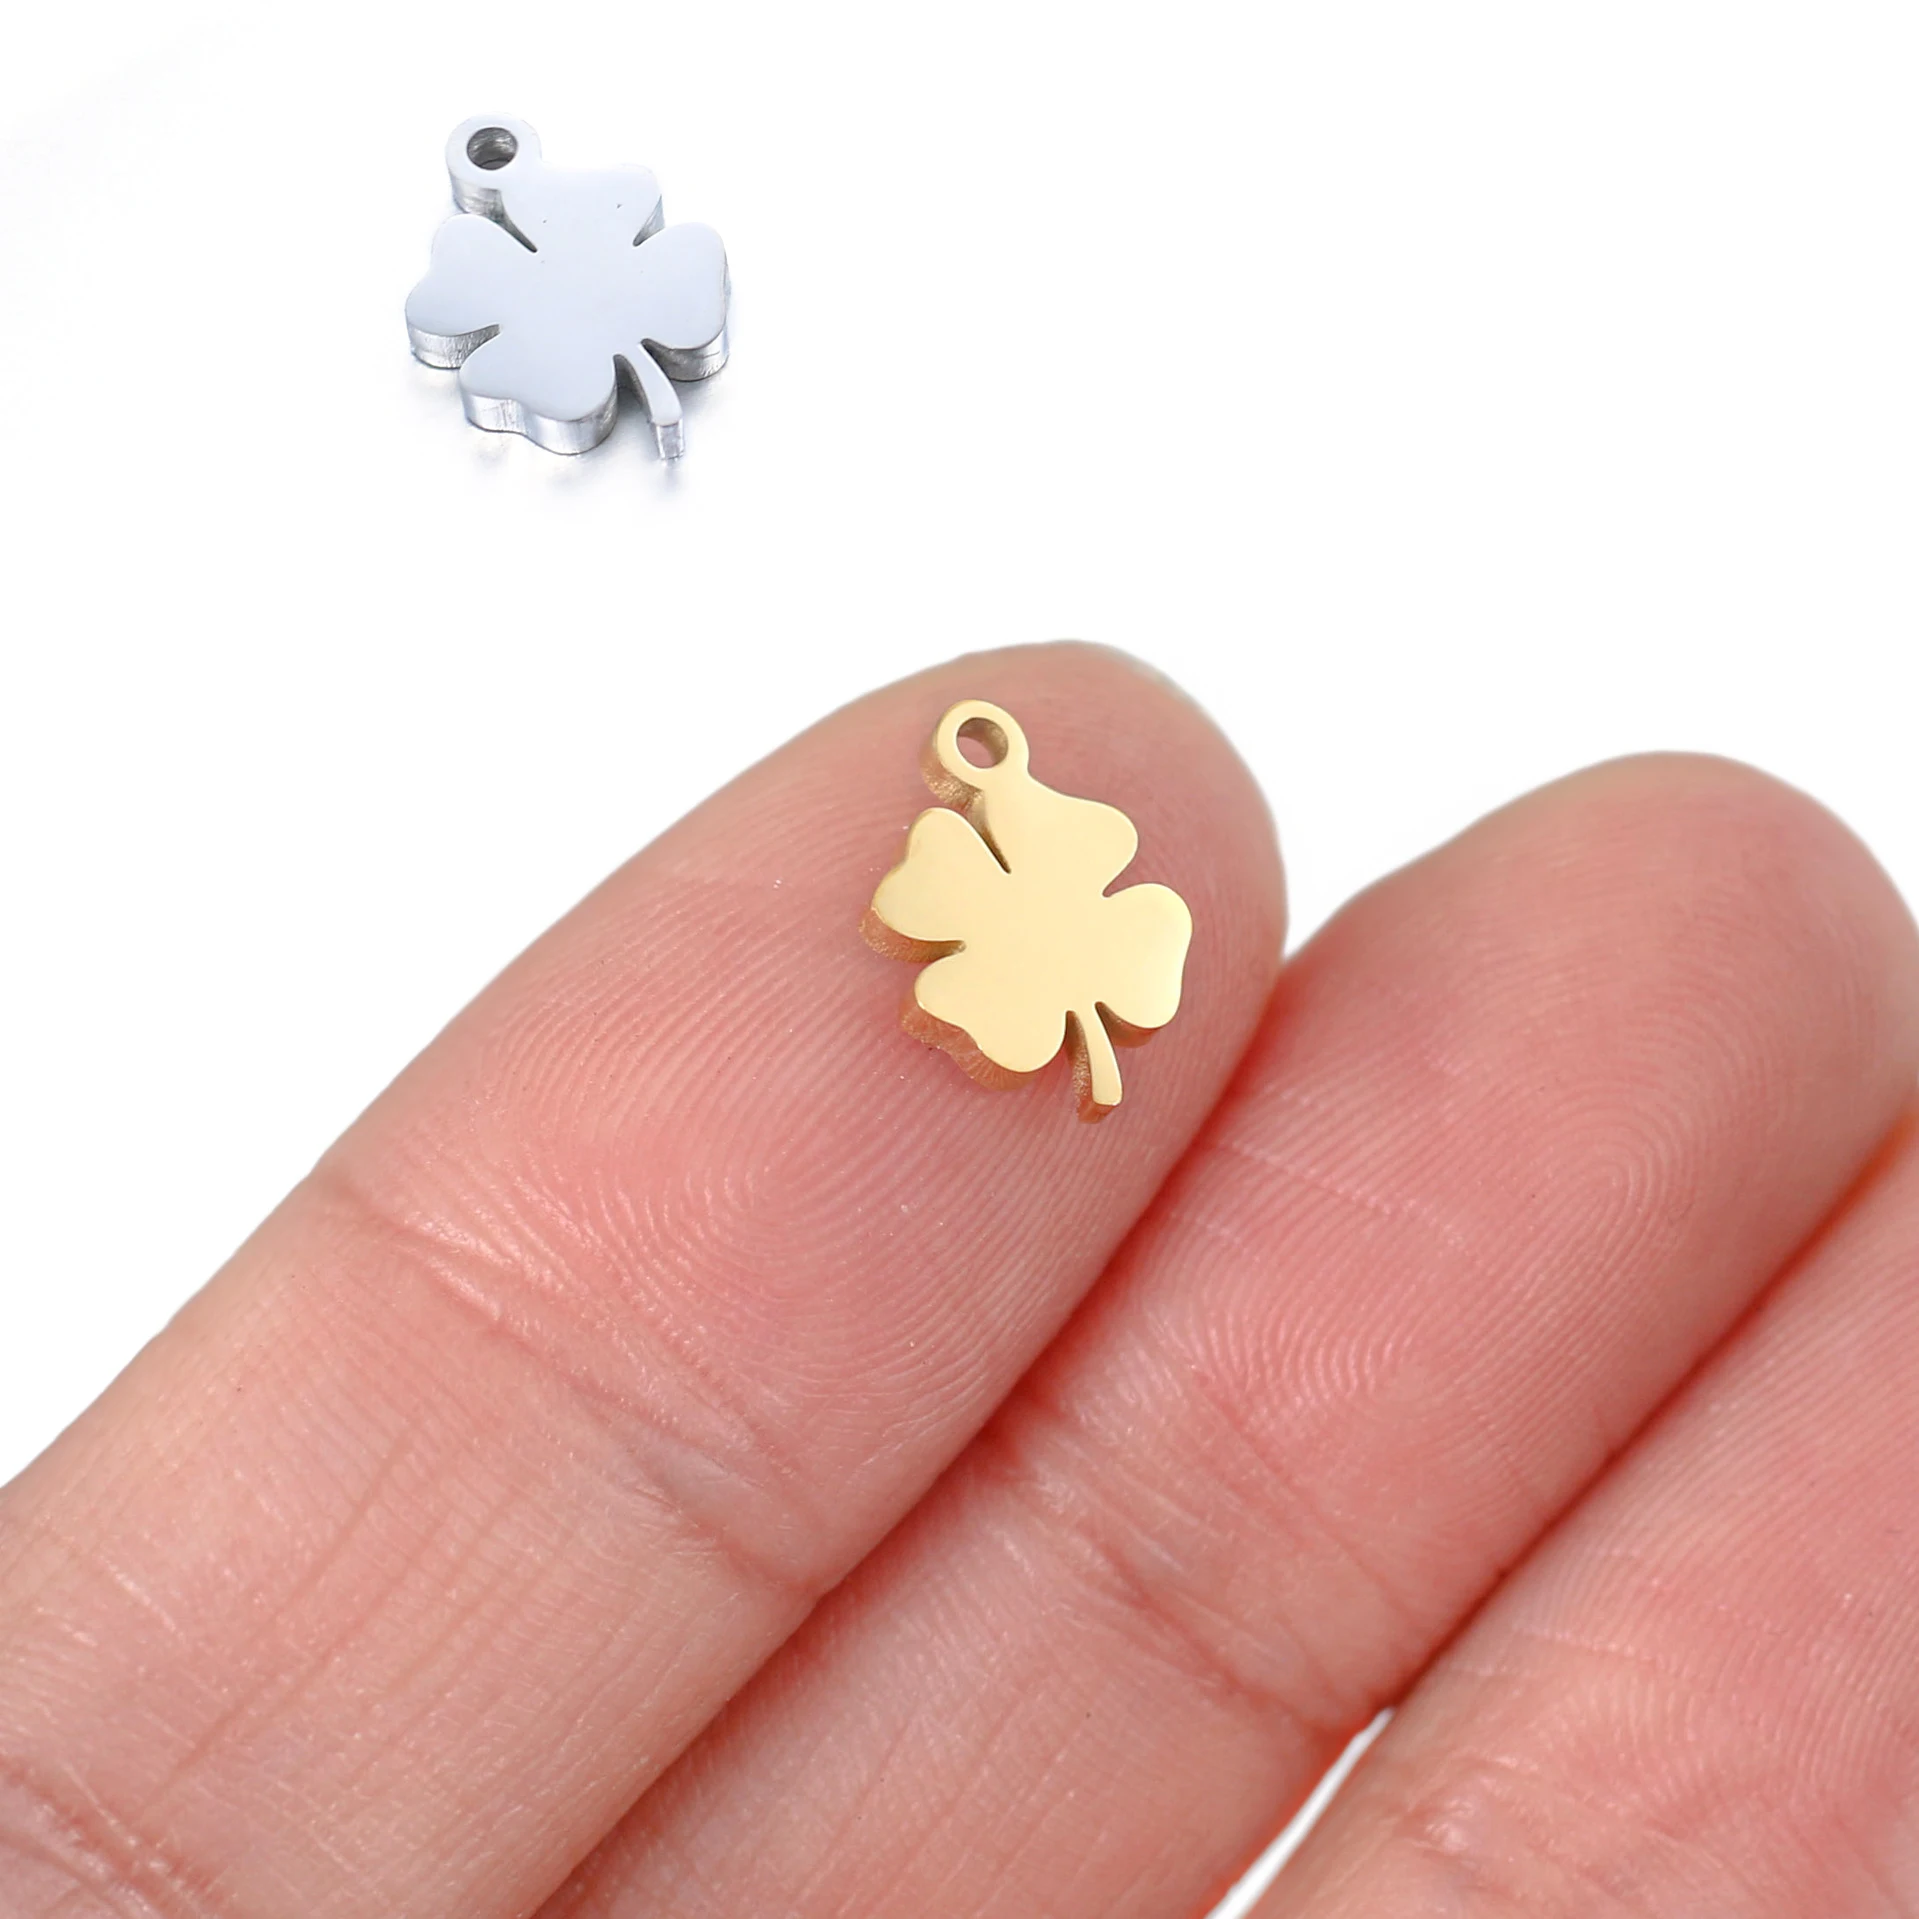 

5Pcs/Lot Stainless Steel Lucky Four-leaf Clover Charms Pendants for DIY Necklace Earrings Jewelry Making Accessories Findings